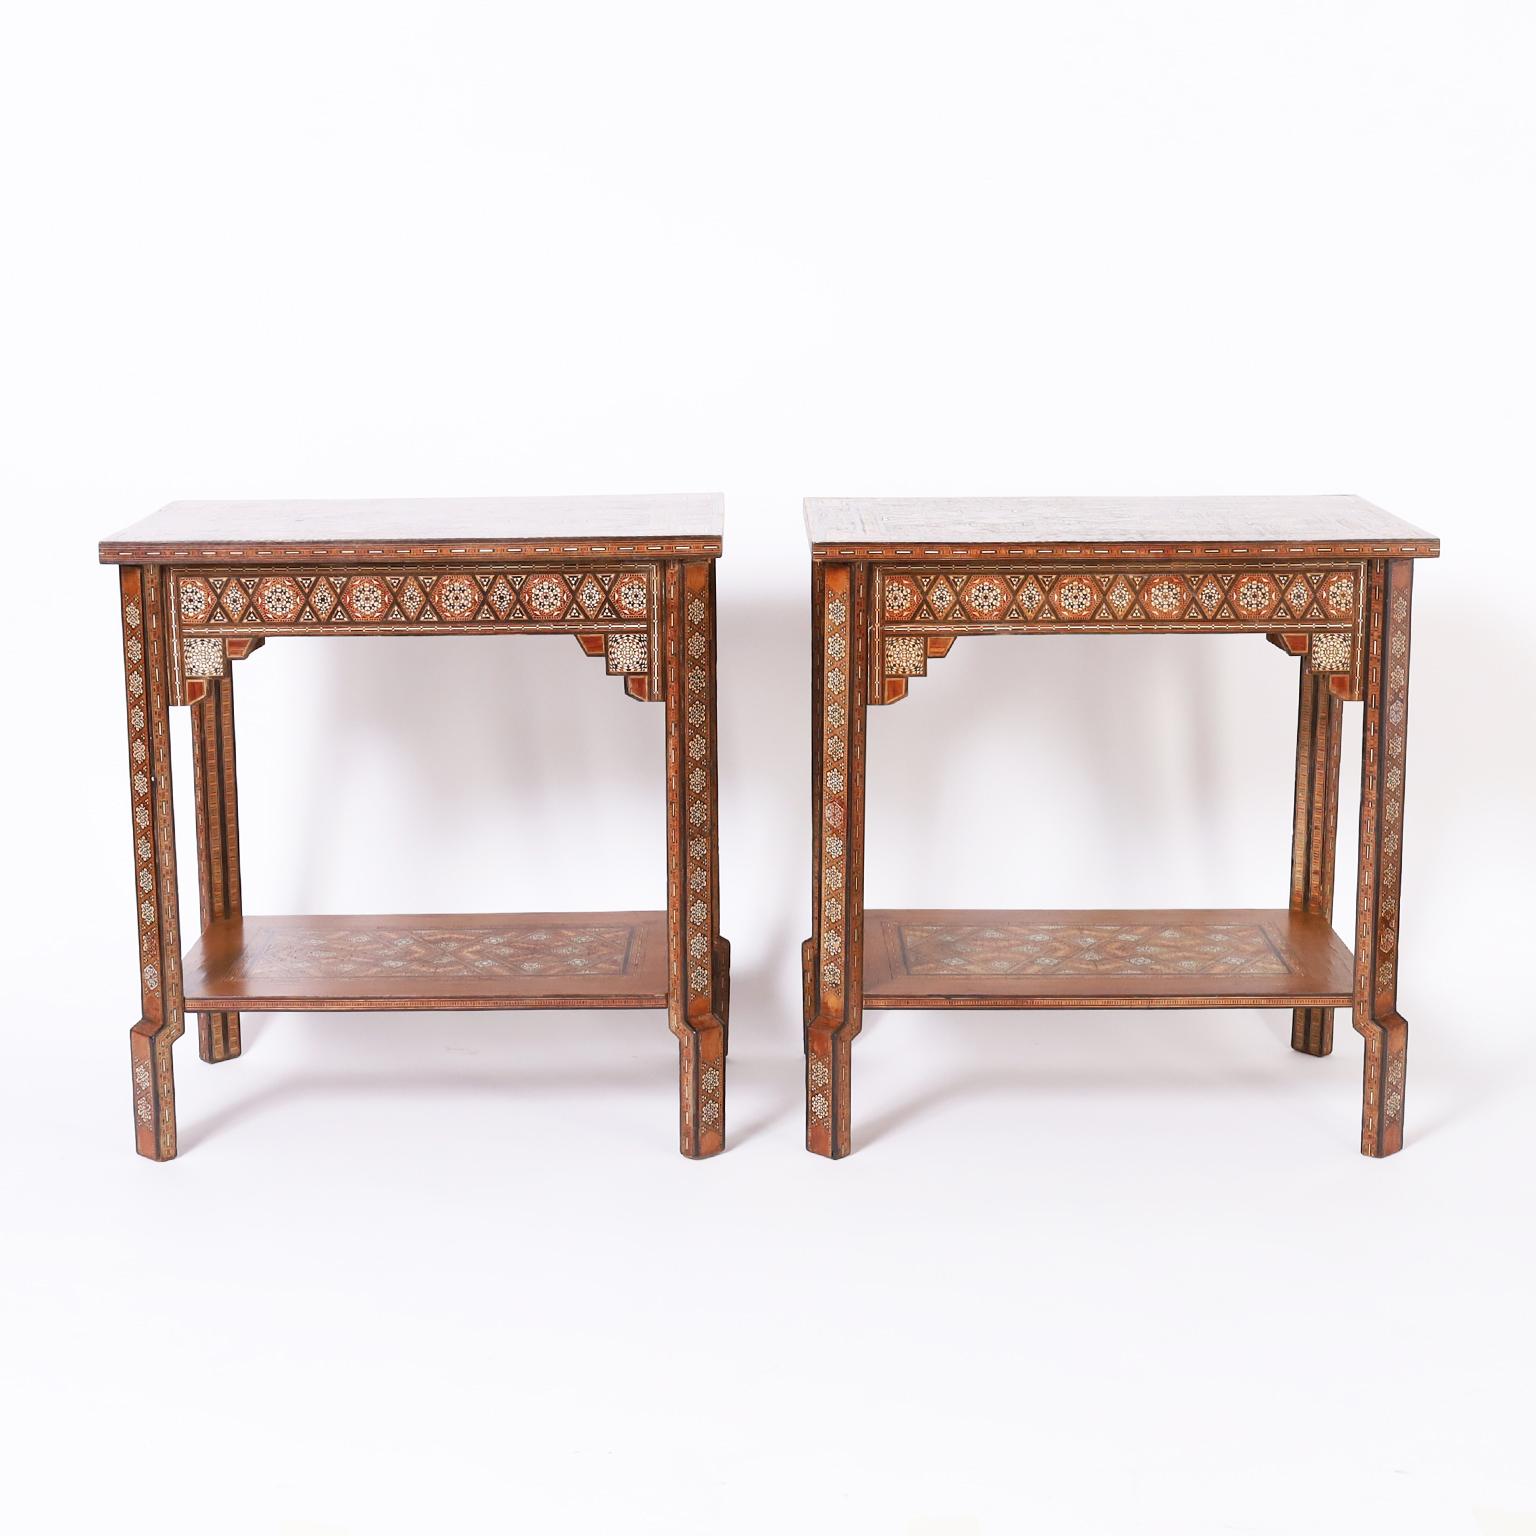 Standout pair of antique near eastern stands crafted in walnut and ambitiously inlaid with geometric micro mosaic marquetry consisting of bone, mother of pearl, ebony and mahogany on both tiers, legs and dog leg feet.